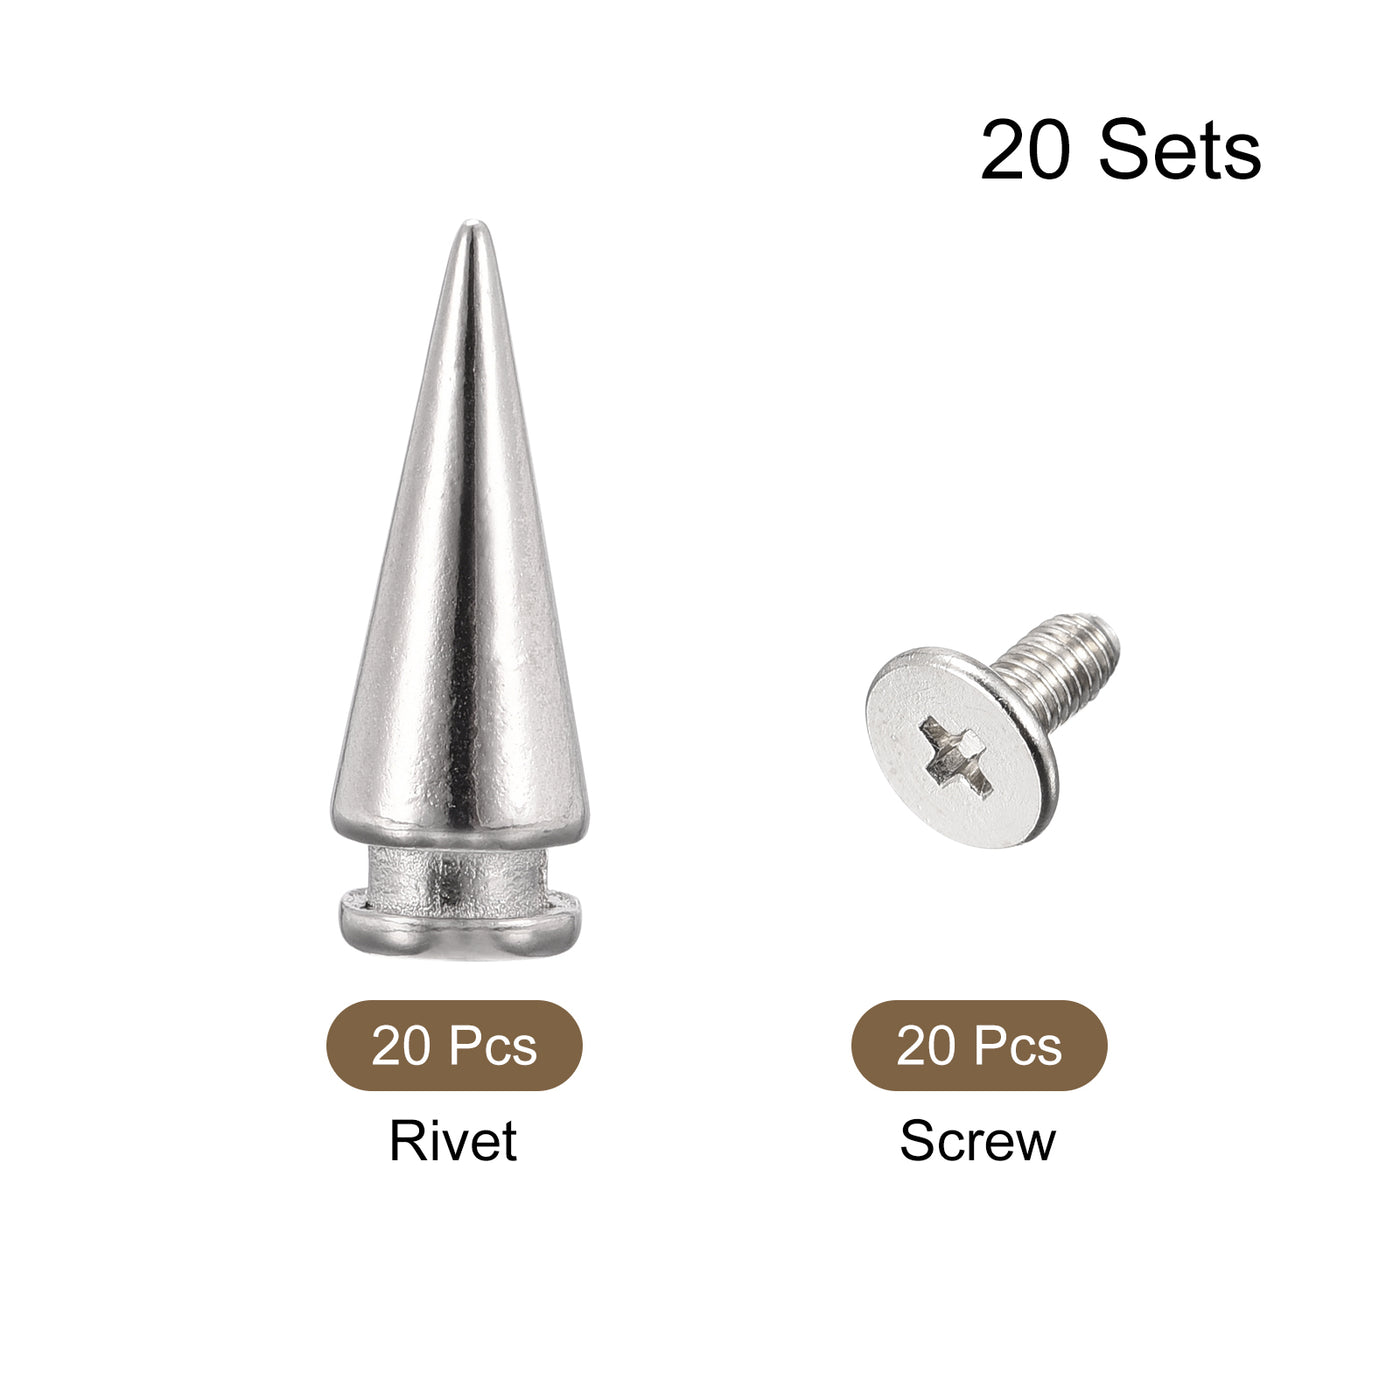 Uxcell Uxcell 7x20mm Screw Back Stud Rivets Spikes Zinc Alloy for DIY Dark Gray 20 Sets